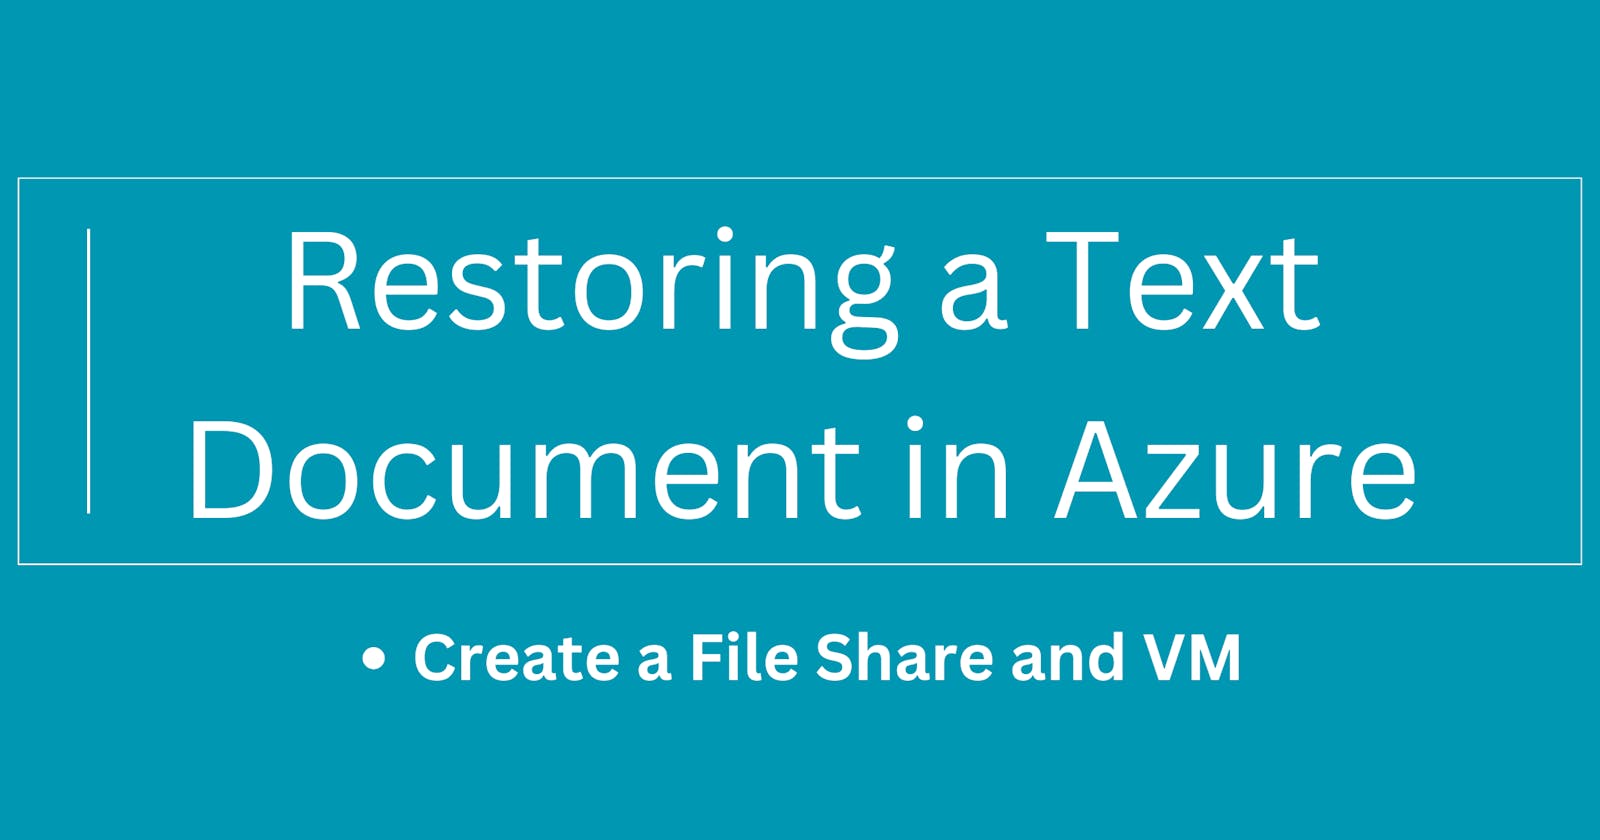 Restoring a Text Document in Azure: A Step-by-Step Guide